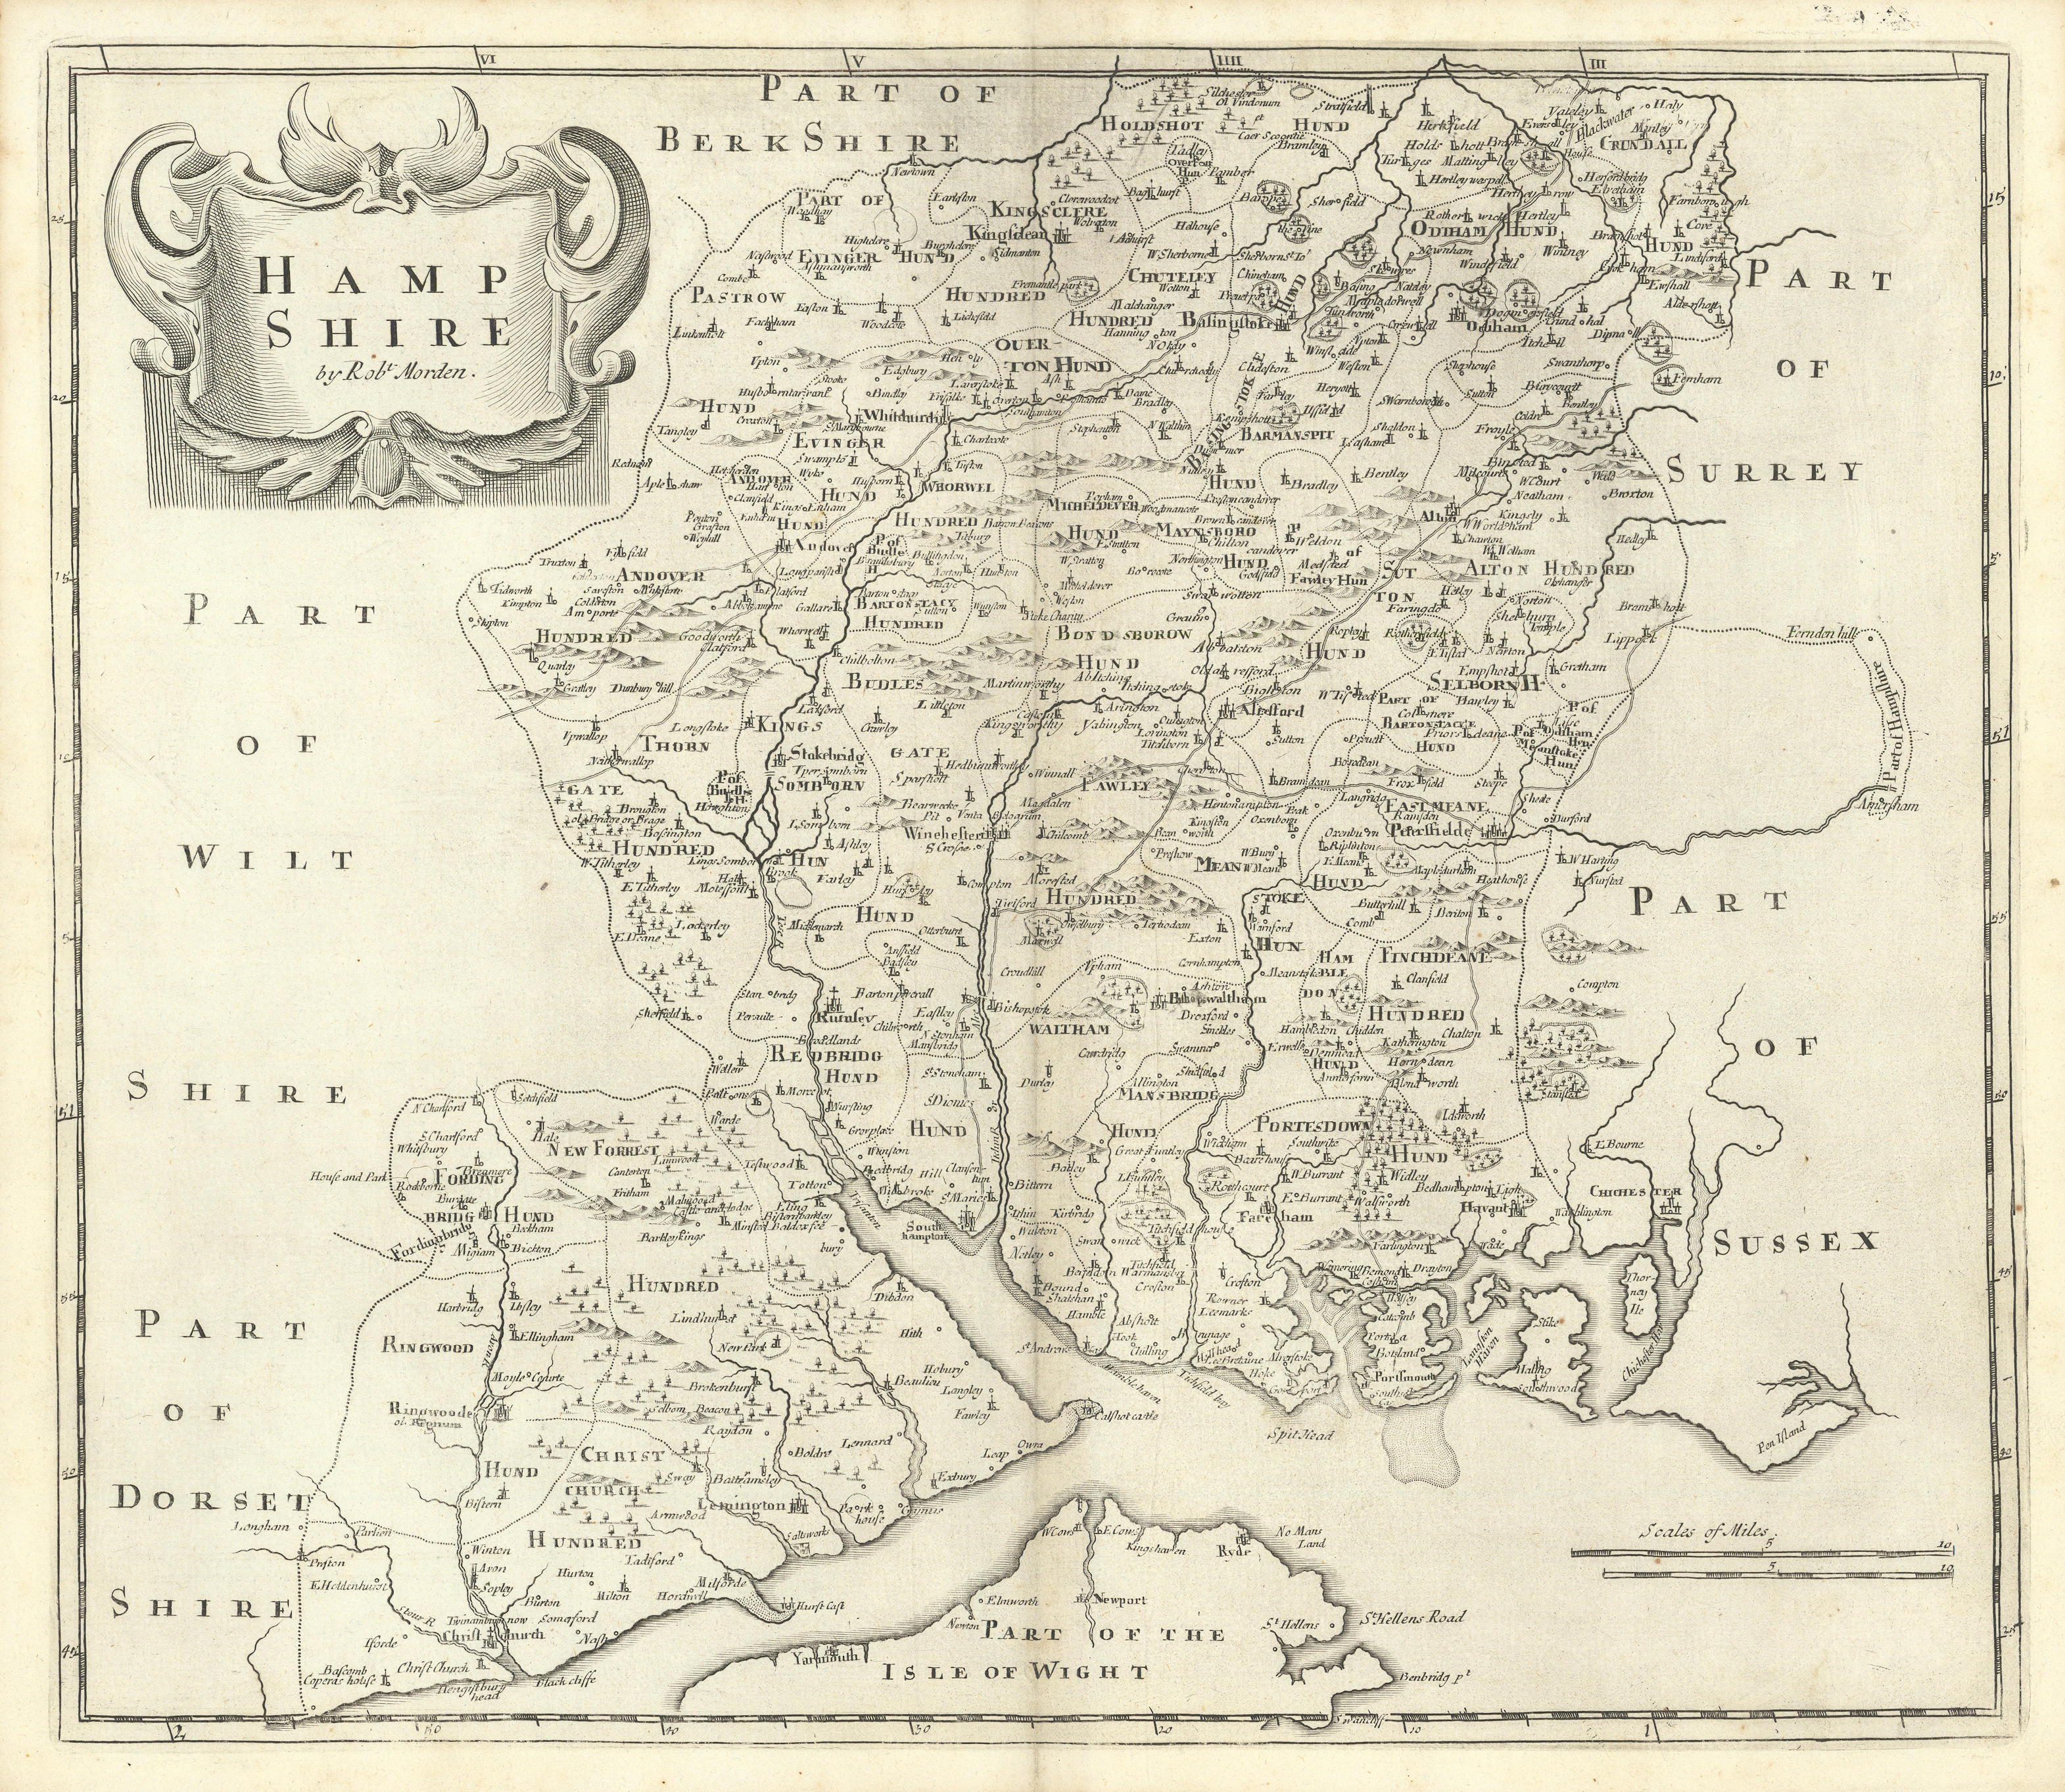 Associate Product Hampshire. 'HAMP SHIRE' by ROBERT MORDEN from Camden's Britannia 1722 old map